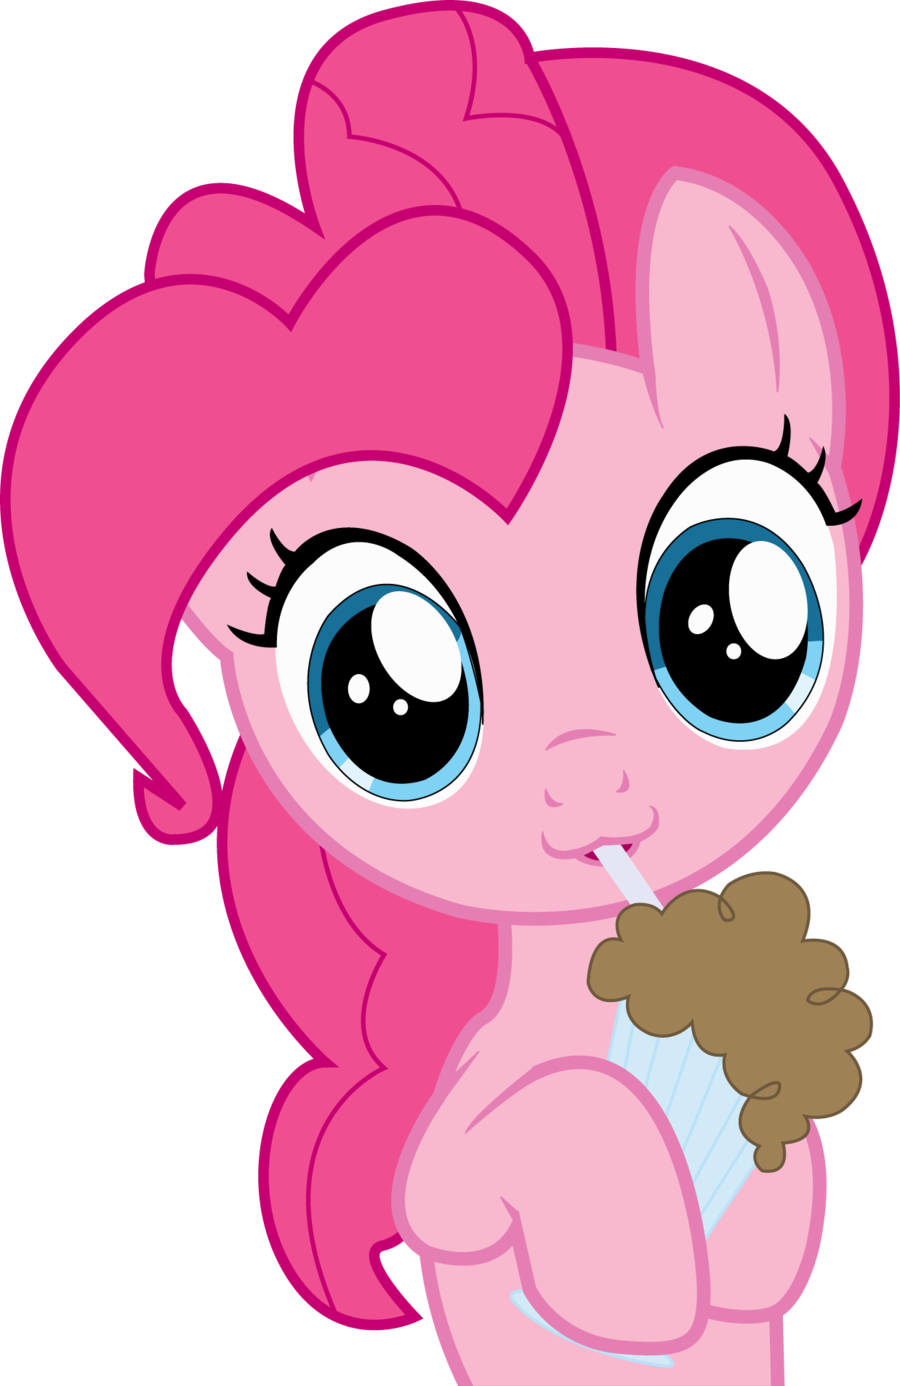 pinkie_pie_filly_by_xered-d5mxa2p.png